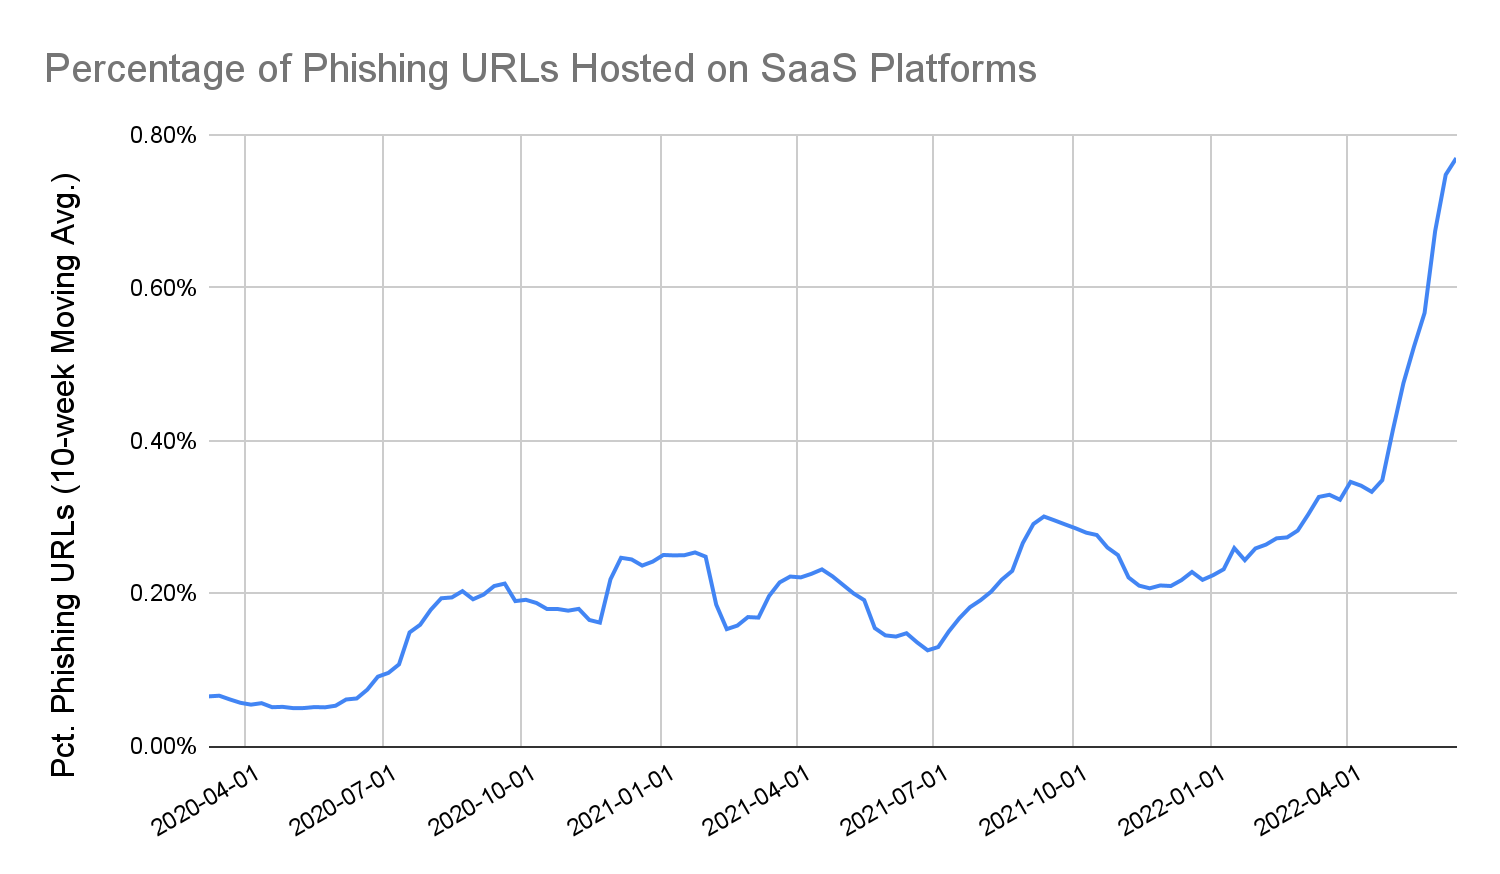 Percentage of Phishing URLs Hosted on SaaS Platforms. The chart shows the pct. phishing URLs in terms of a 10-week moving average from April 2020-April 2022, with a notable spike toward the end of the period shown. 